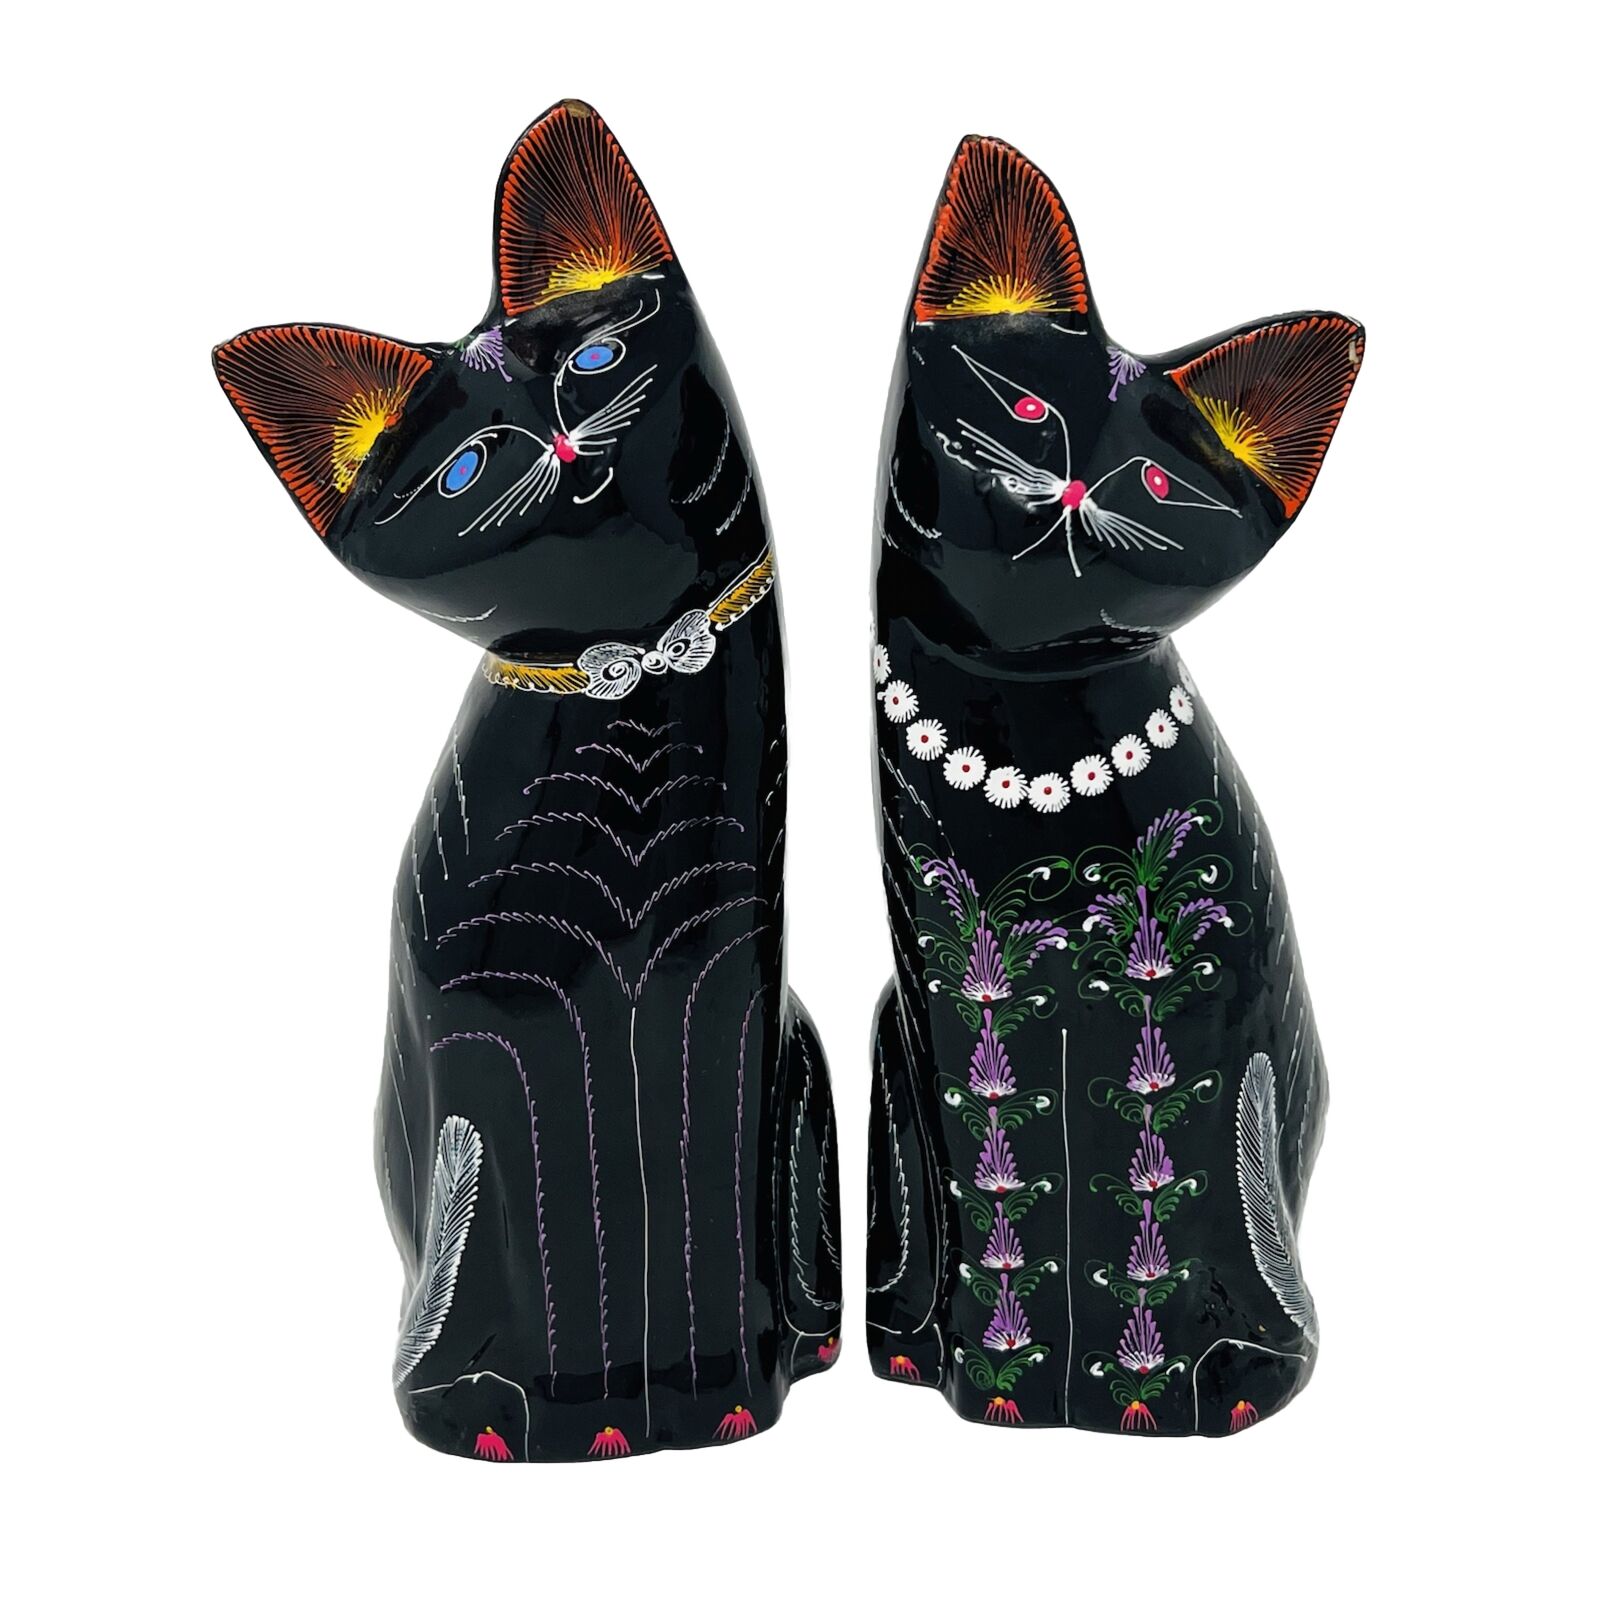 2x Black Lacquer Cat Figurines Hand Painted Multicolored Flower Design, 8.5 in